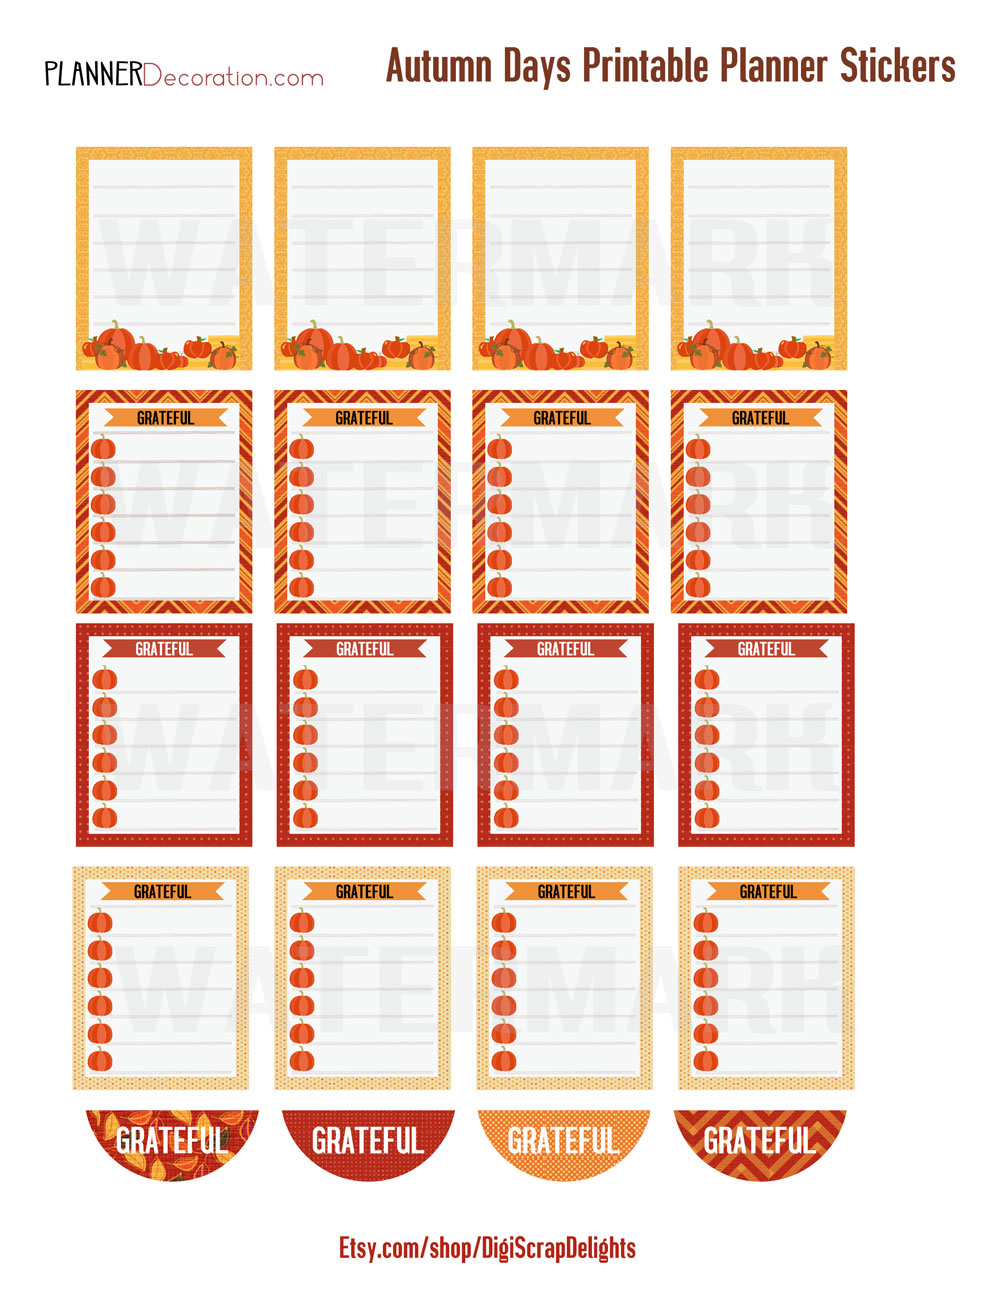 Autumn or Fall Planner Stickersfit Erin Condrin sizes and fit many others. Fox, owls, graduated, pumpkin lists, tons of icons. Pumpkin spice, crows, corn, banners, tractor tons of clip art